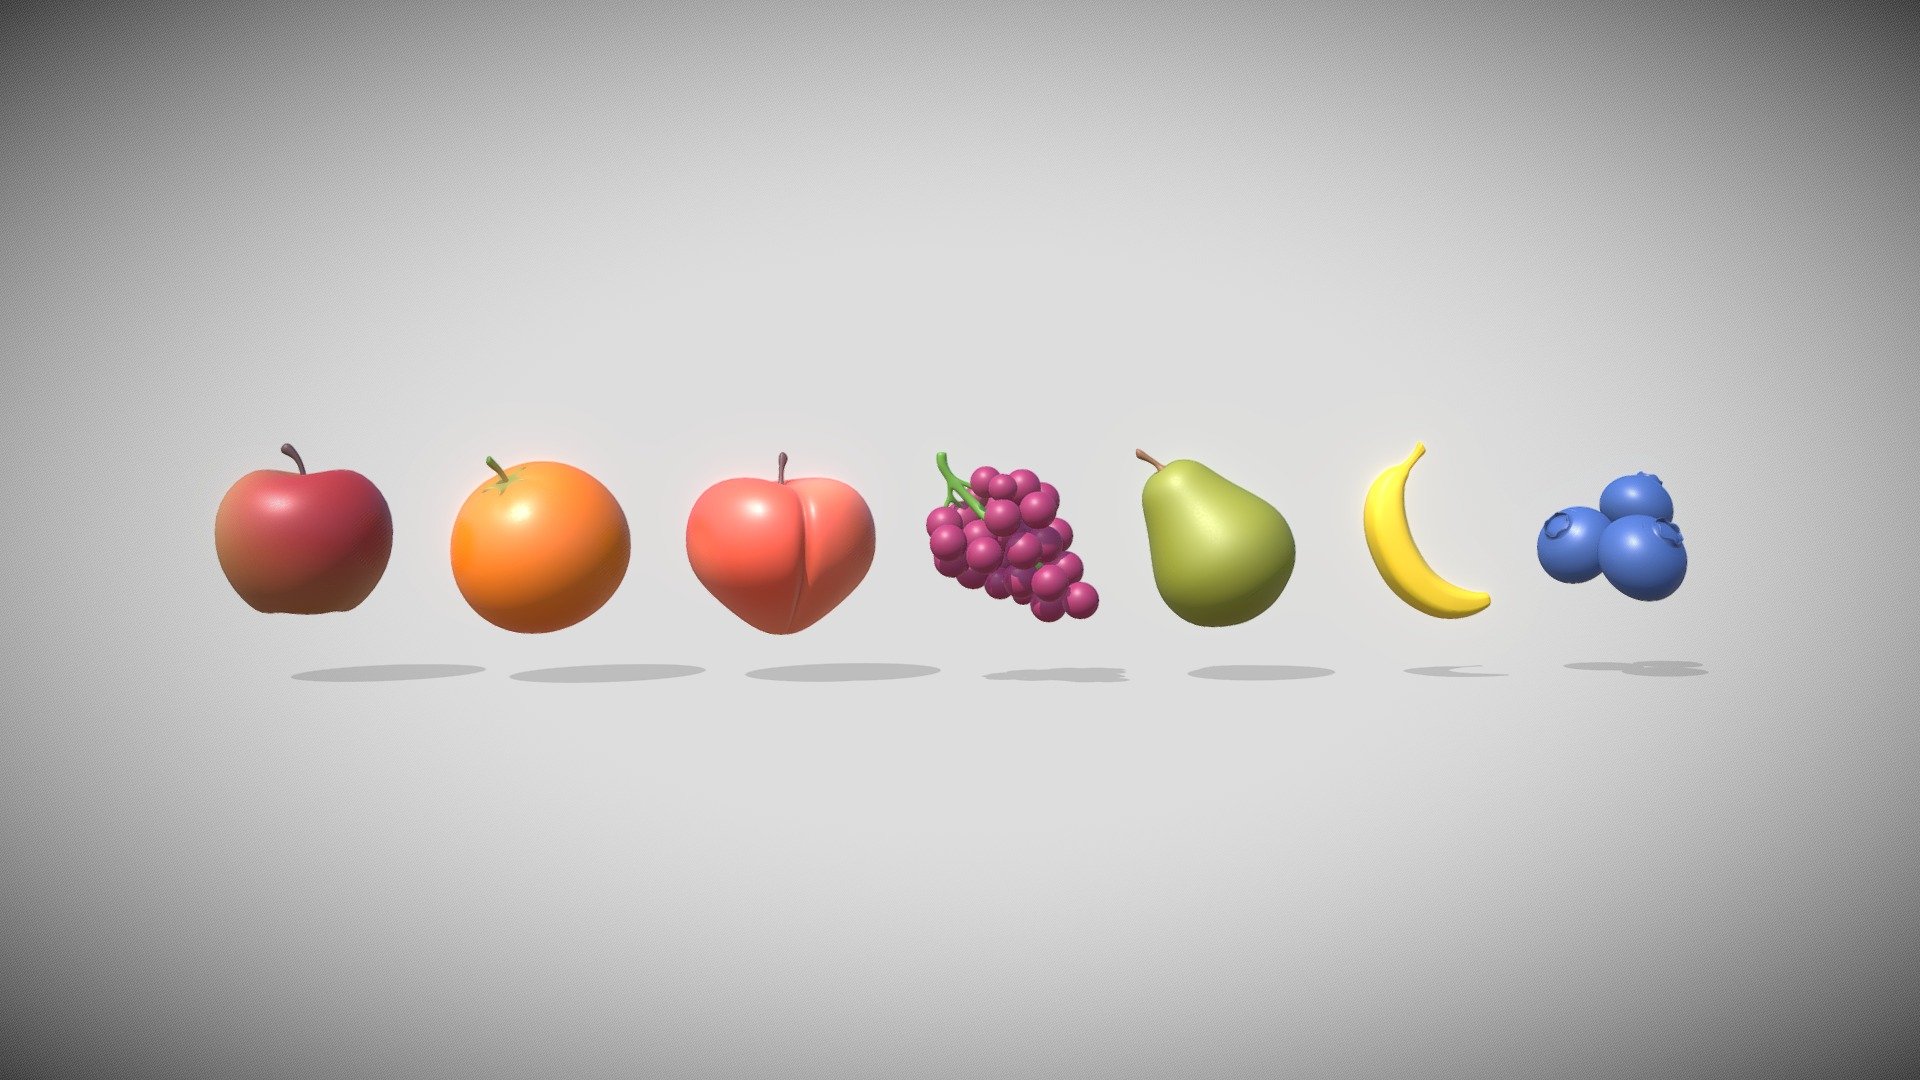 7 fruits made in the style of Apple emoji

🍎🍊🍑🍇🍐🍌🫐 - Fruits - 3D model by Lucullu 3d model